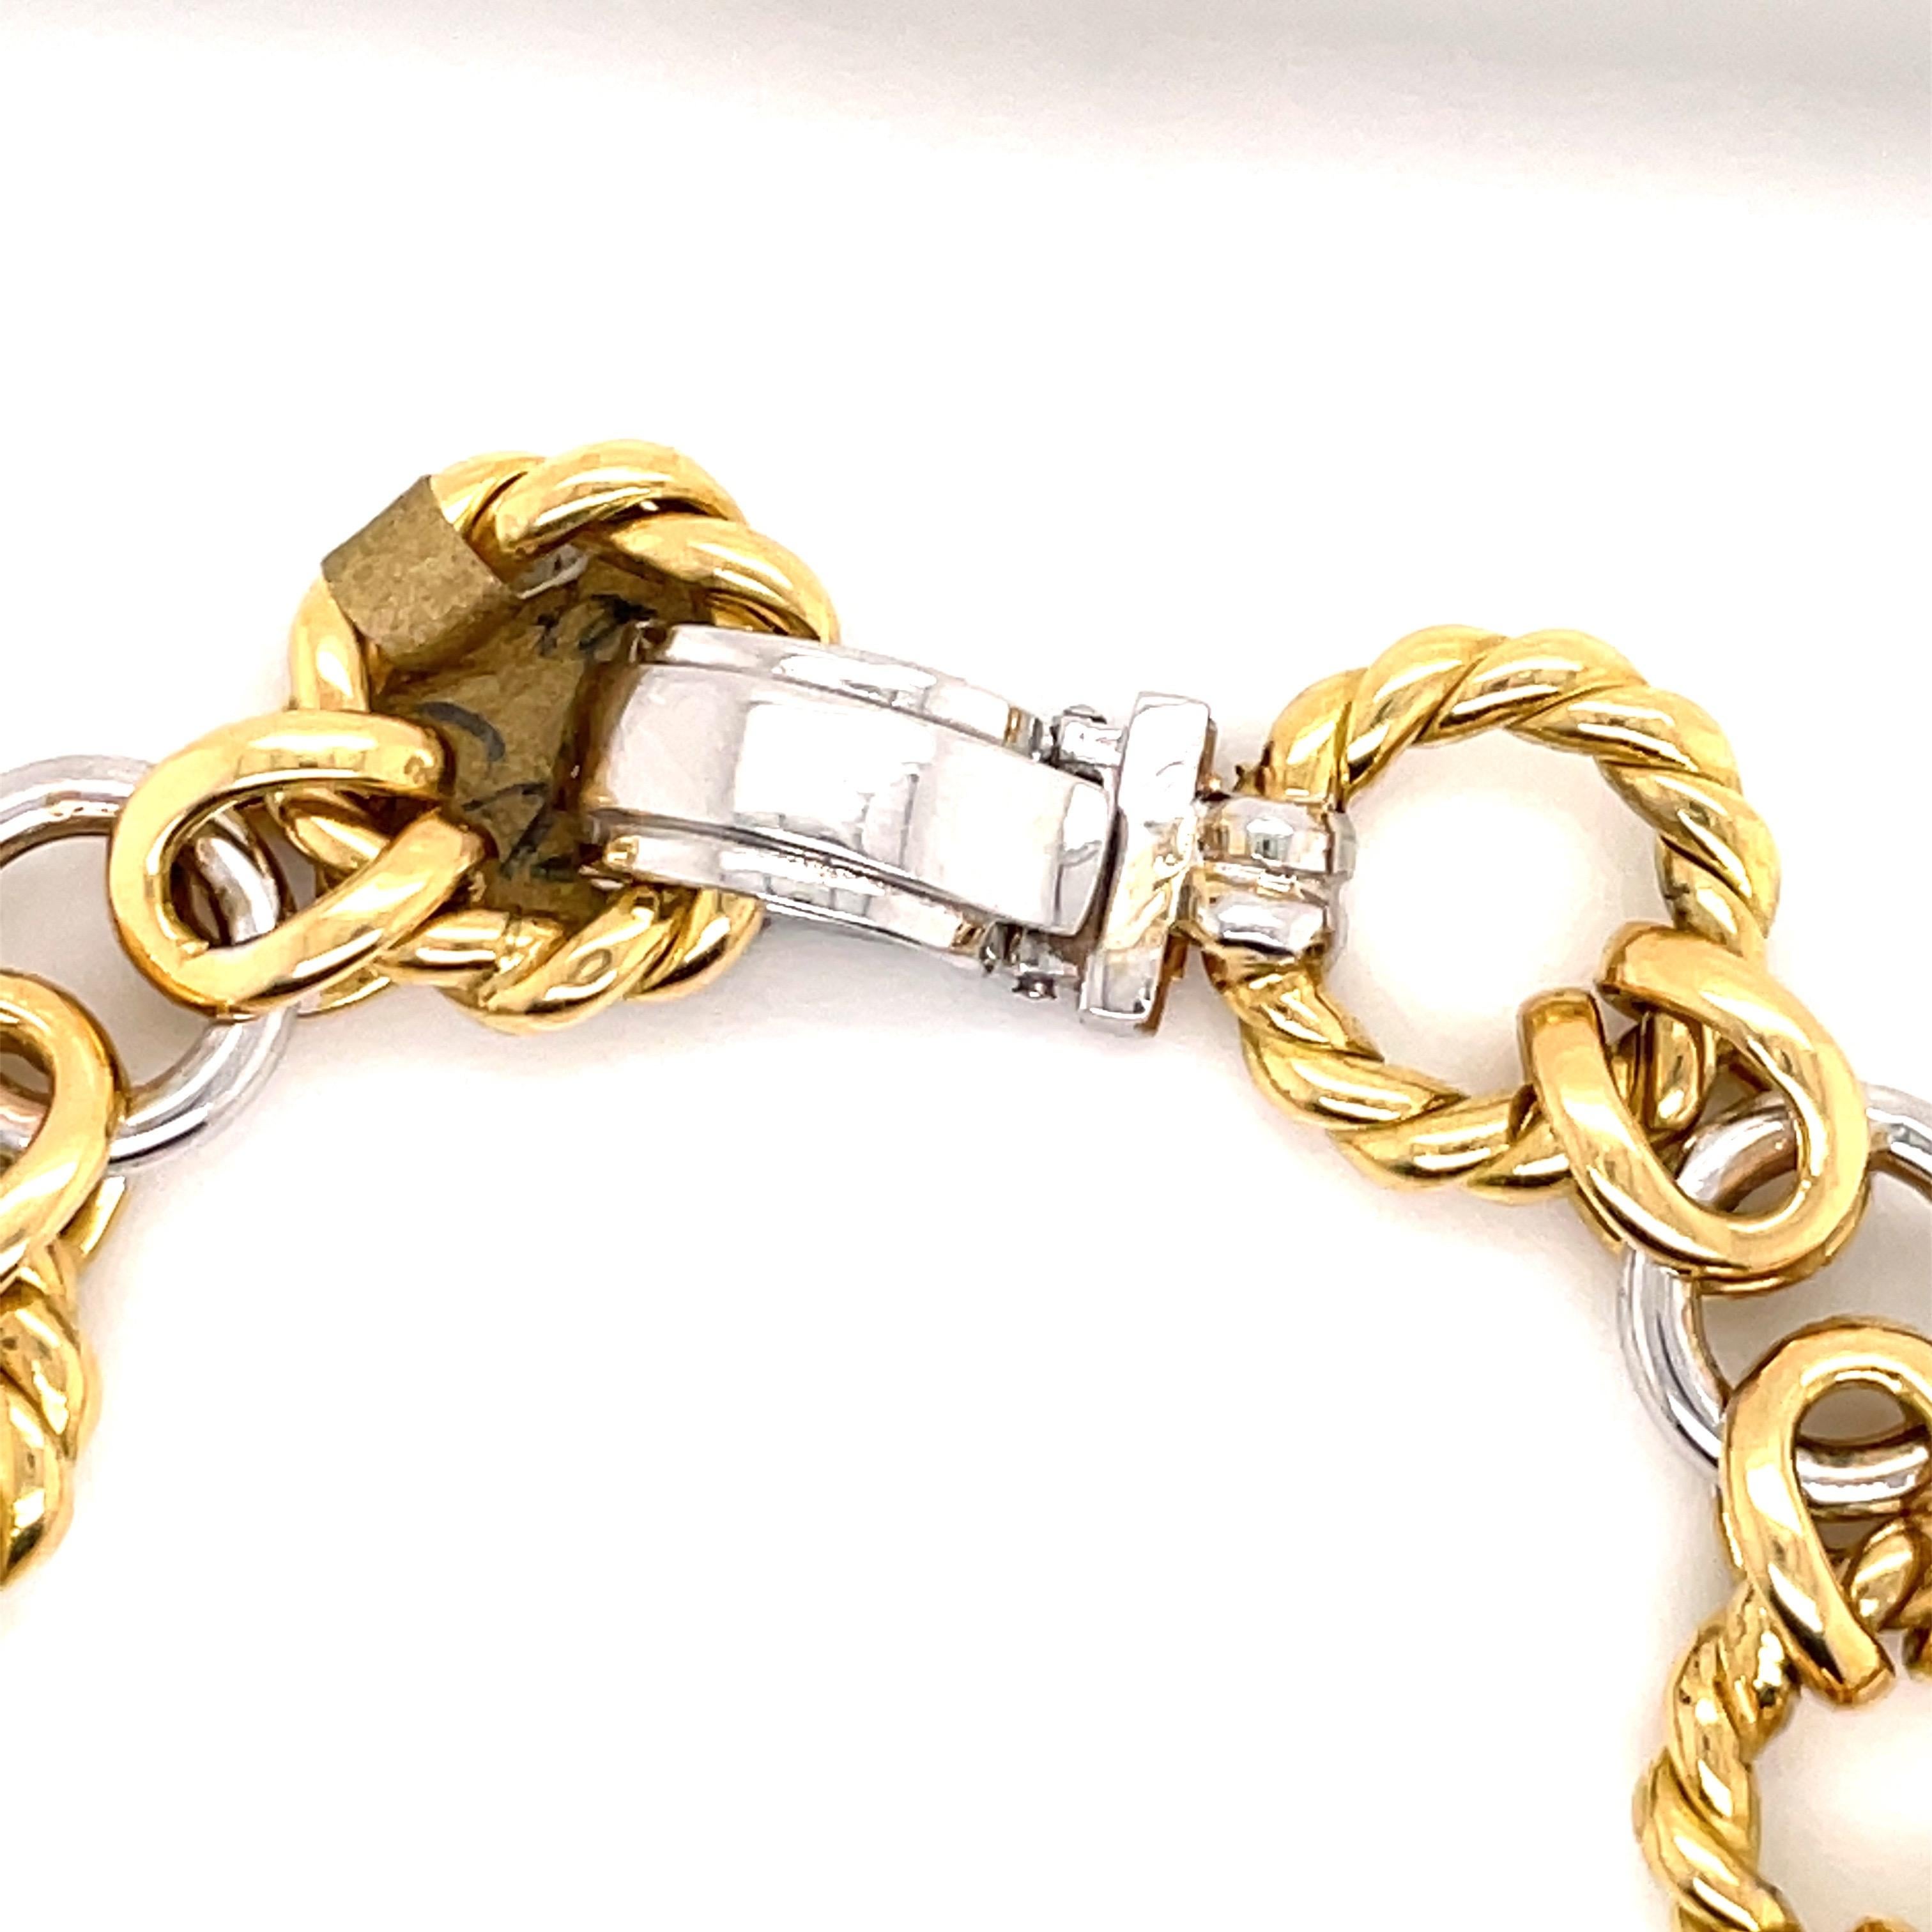 Contemporary 18 Karat Yellow & White Gold Link Bracelet 20.8 Grams Made in Italy